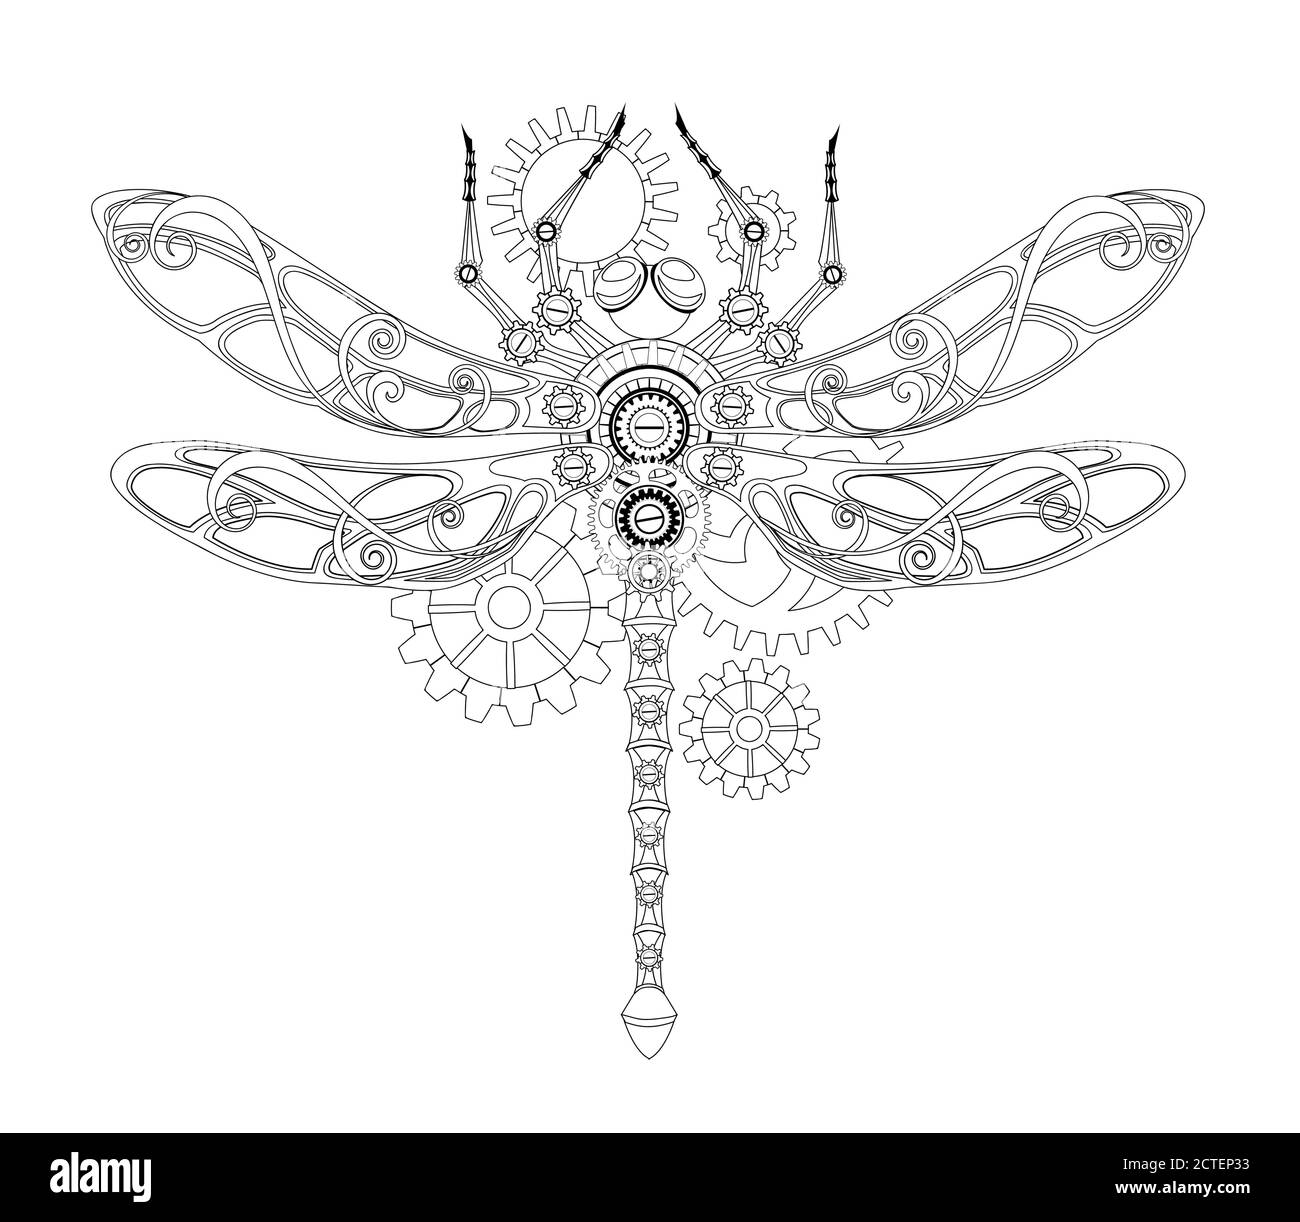 Antique, contour, mechanical dragonfly with gears on white background. Steampunk style. Stock Vector